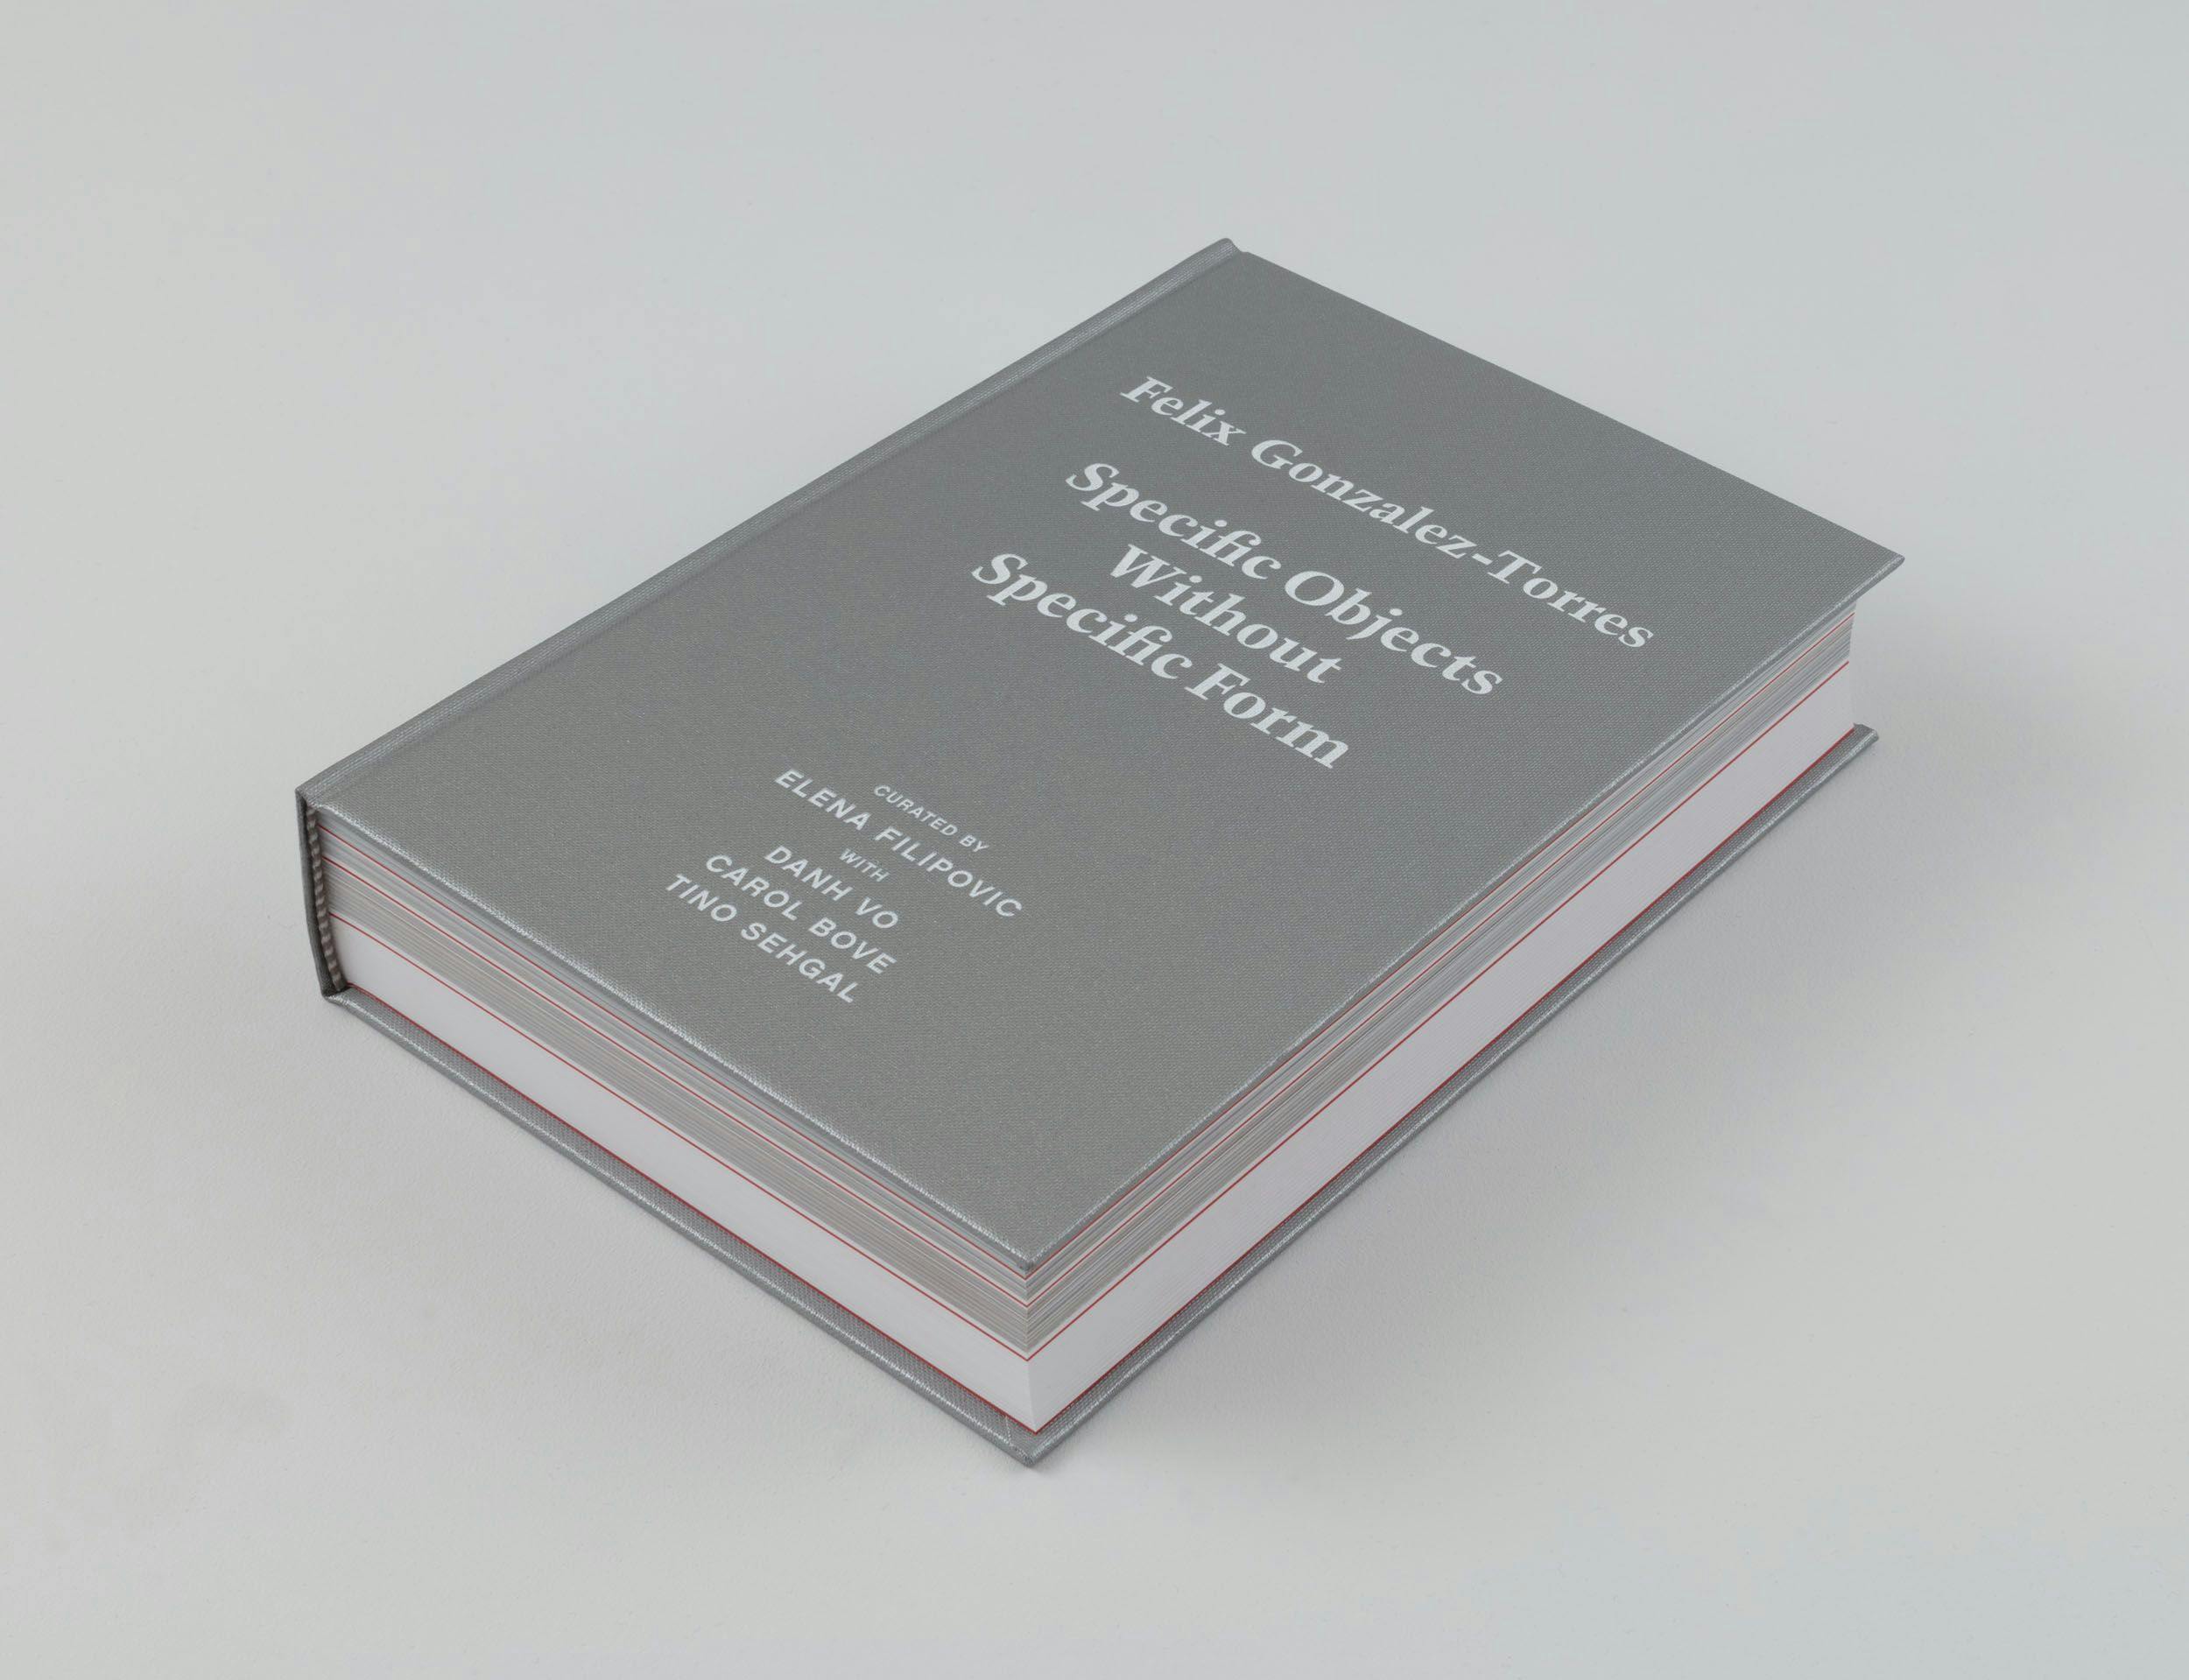 A photograph of the book Felix Gonzalez-Torres: Specific Objects Without Specific Form, dated 2016.